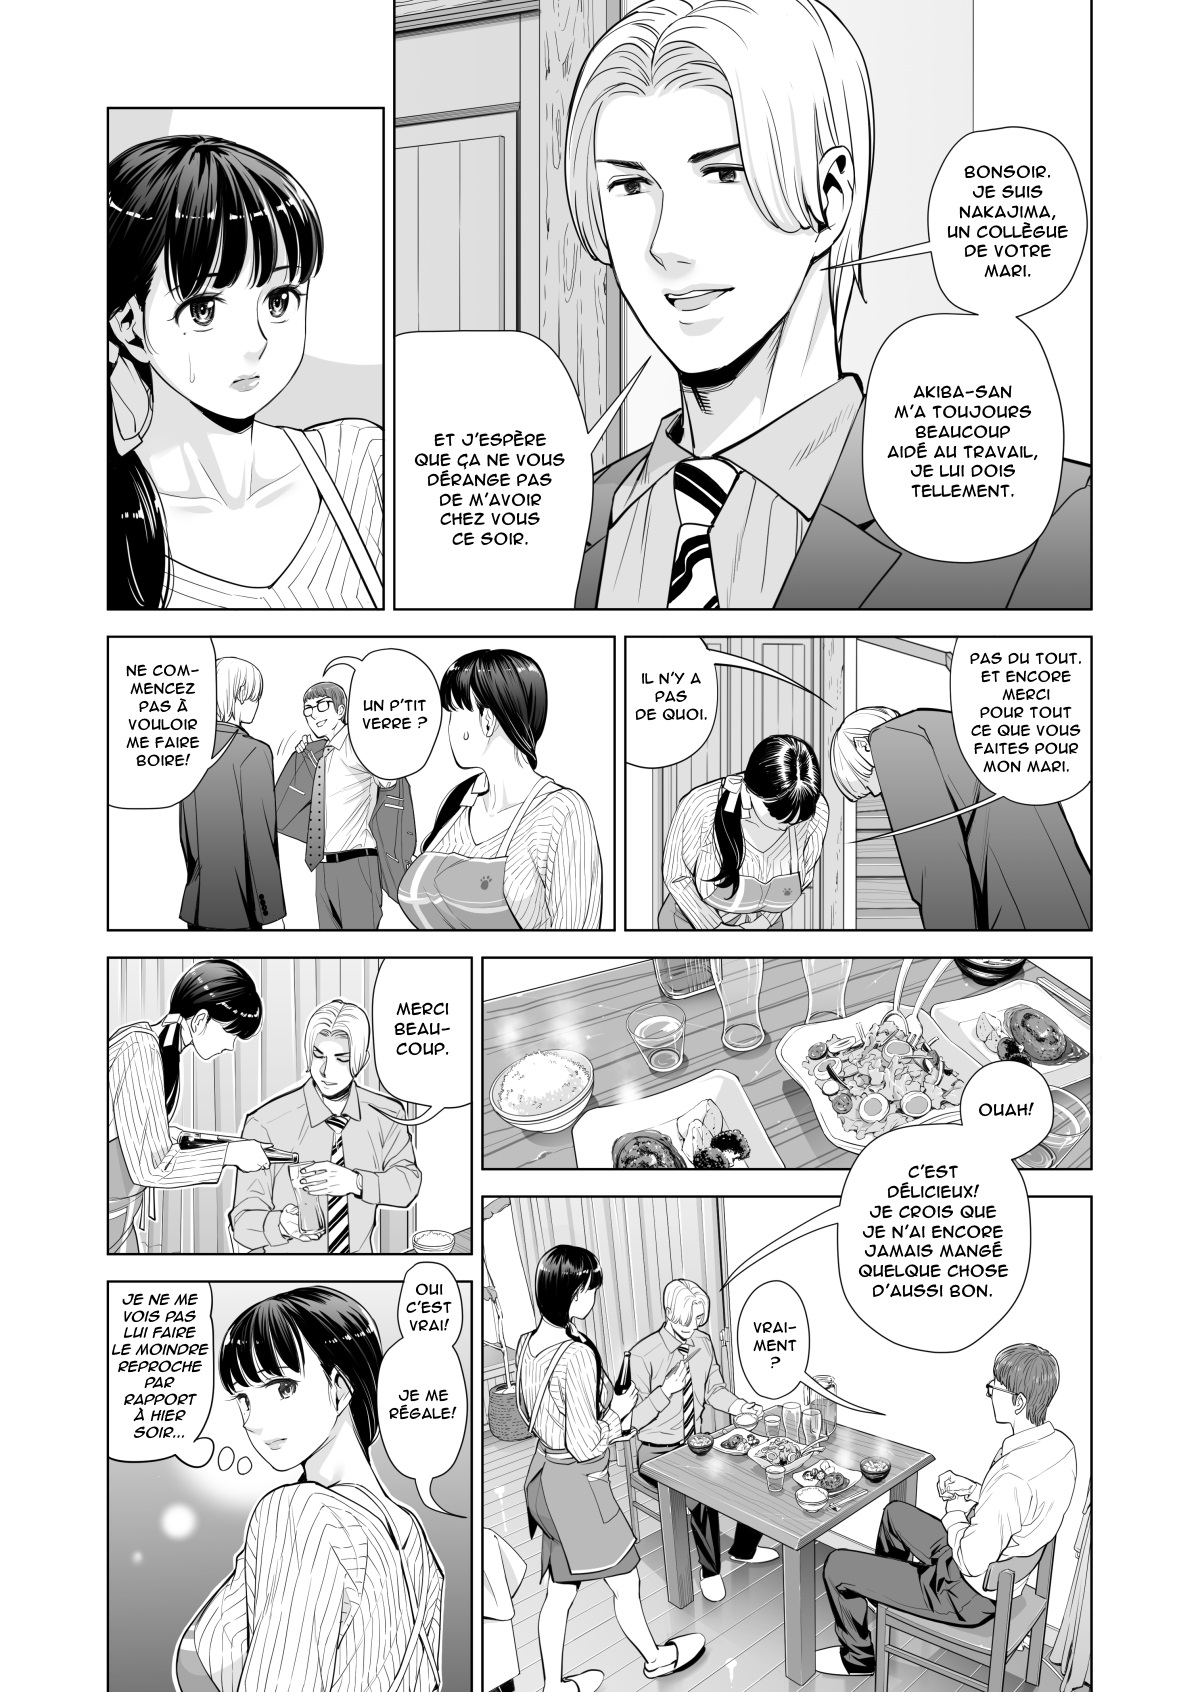 Tsukiyo no Midare Zake  Moonlit Intoxication ~ A Housewife Stolen by a Coworker Besides her Blackout Drunk Husband ~ Chapter 1 numero d'image 21